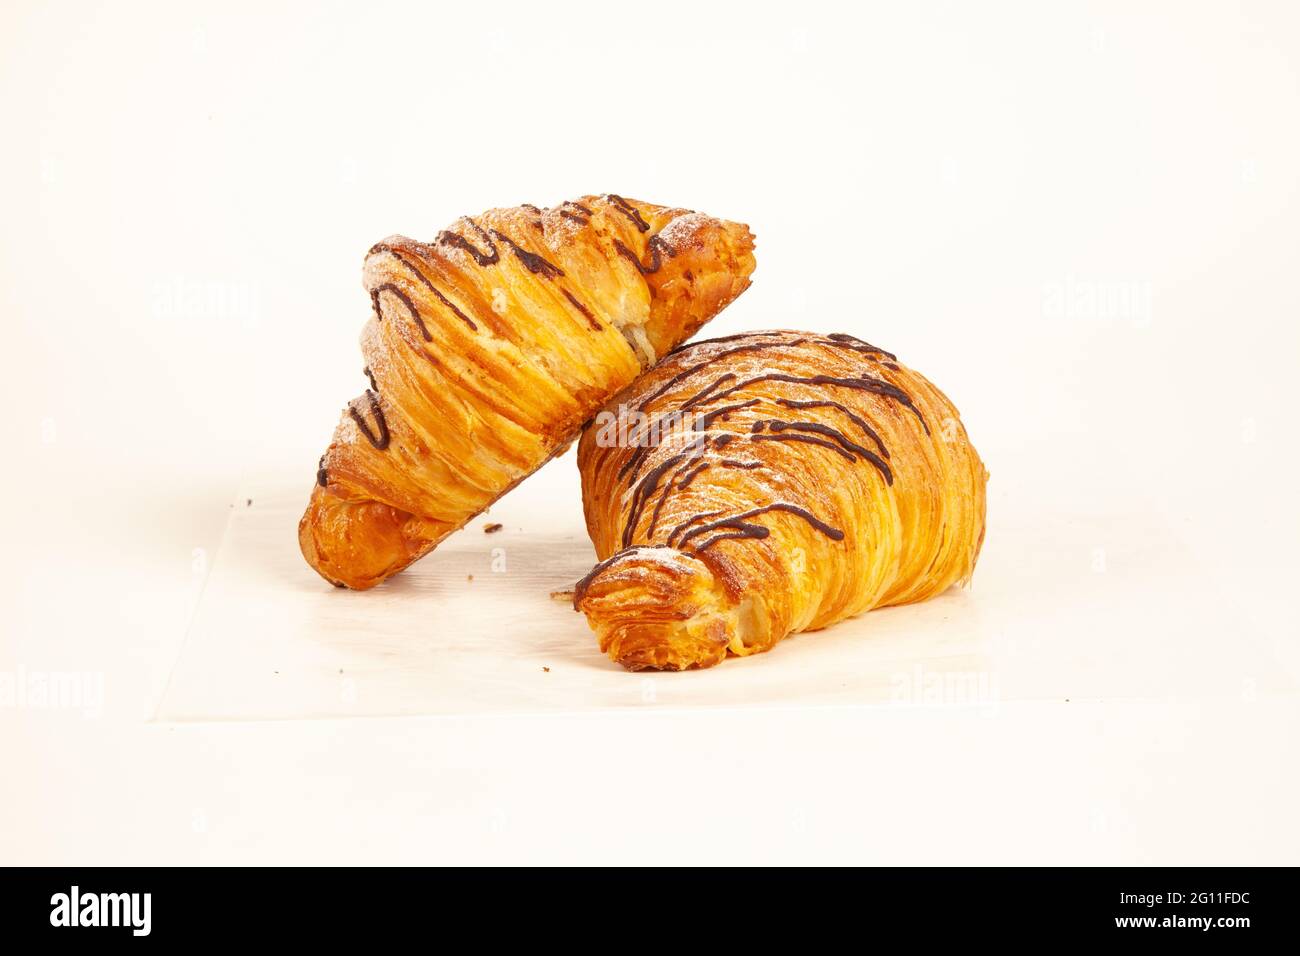 Chocolate filled brioche croissant flaky made in butter isolated on white background Stock Photo